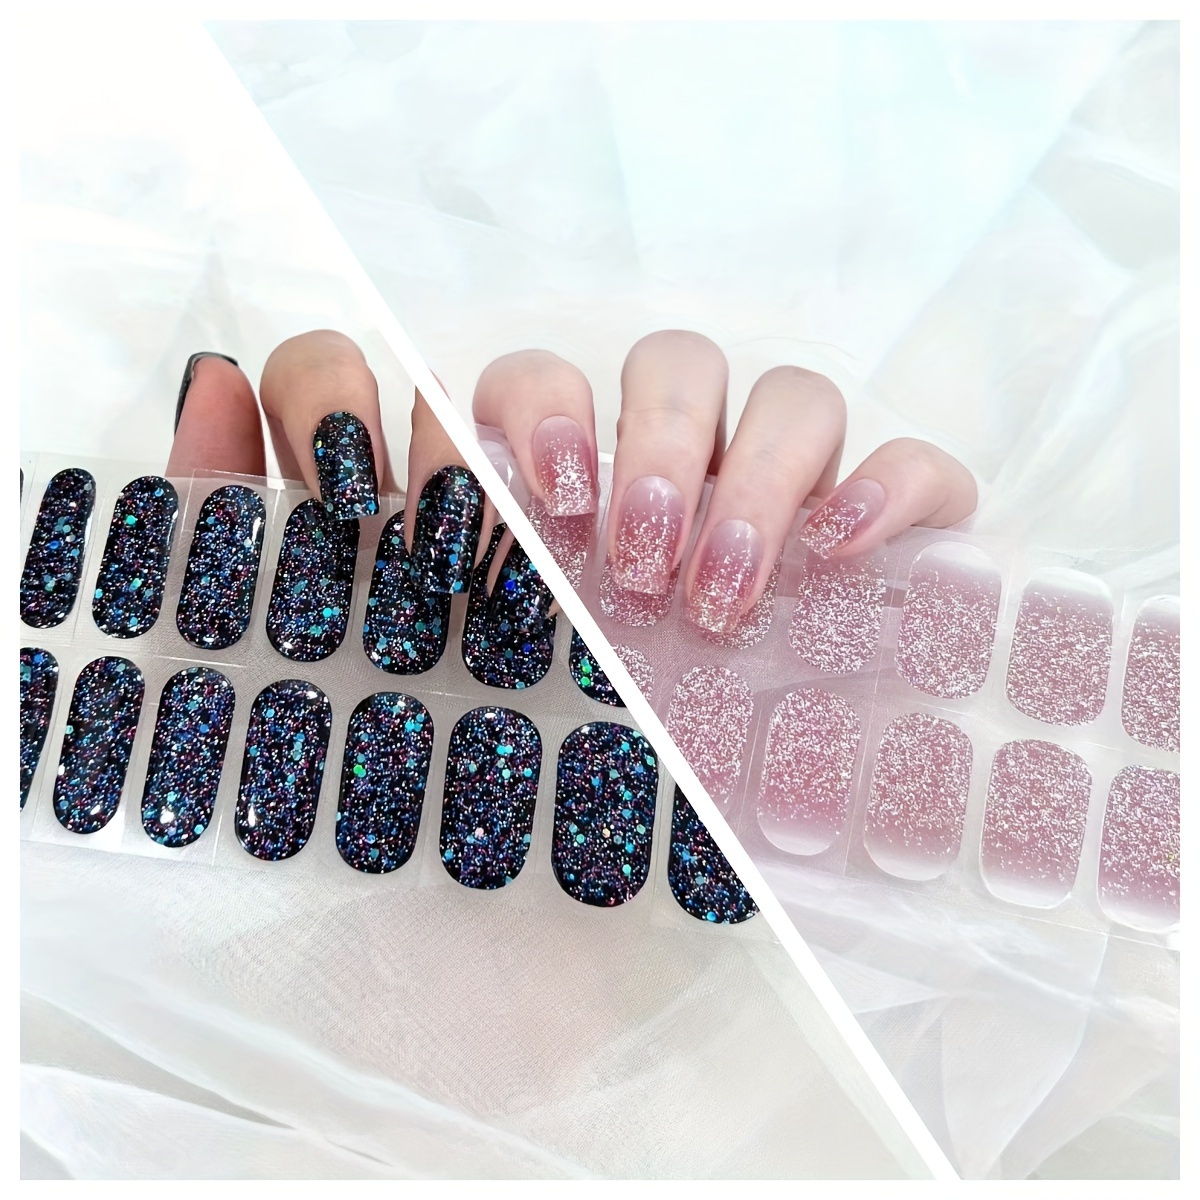 

Semi Cured Gel Nail Wraps, Semi-cured Glitter Gel Nail Strips-works With Any Nail Lamps, Salon-quality, Long Lasting, Easy To Apply & Remove